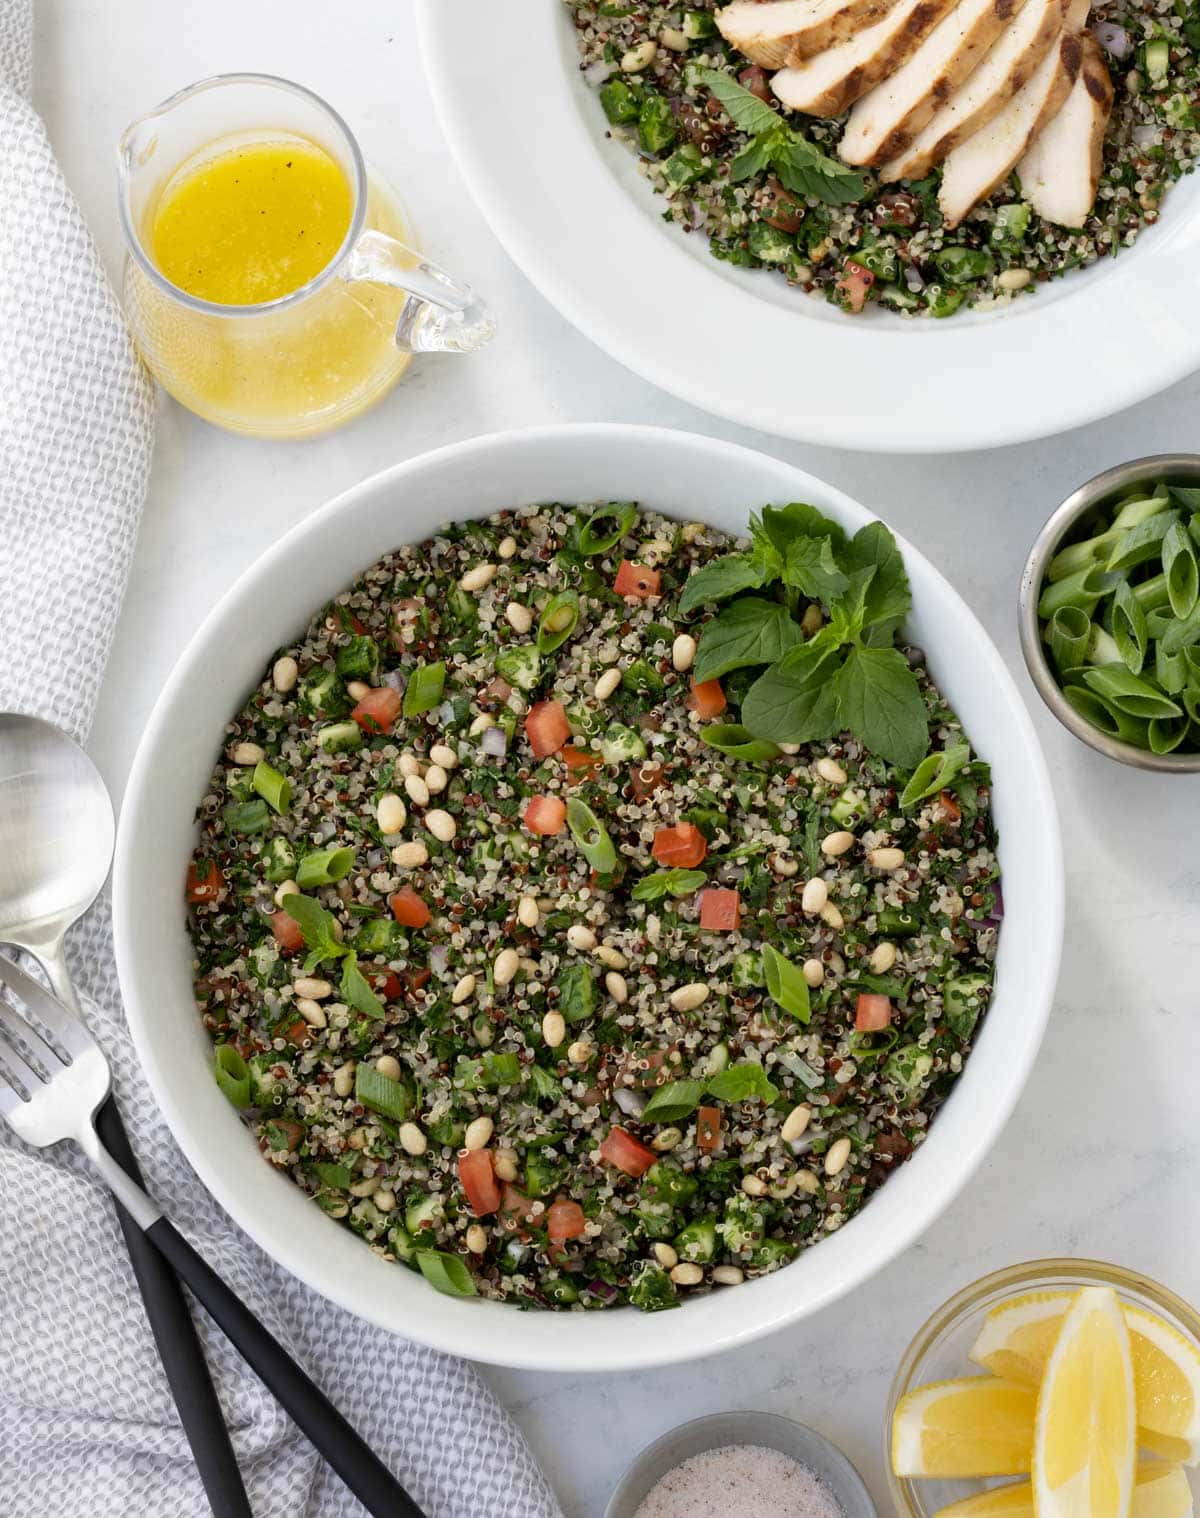 A bowl of tabouli with lots of green parsley, mint, tomatoes, quinoa, and pine nuts.